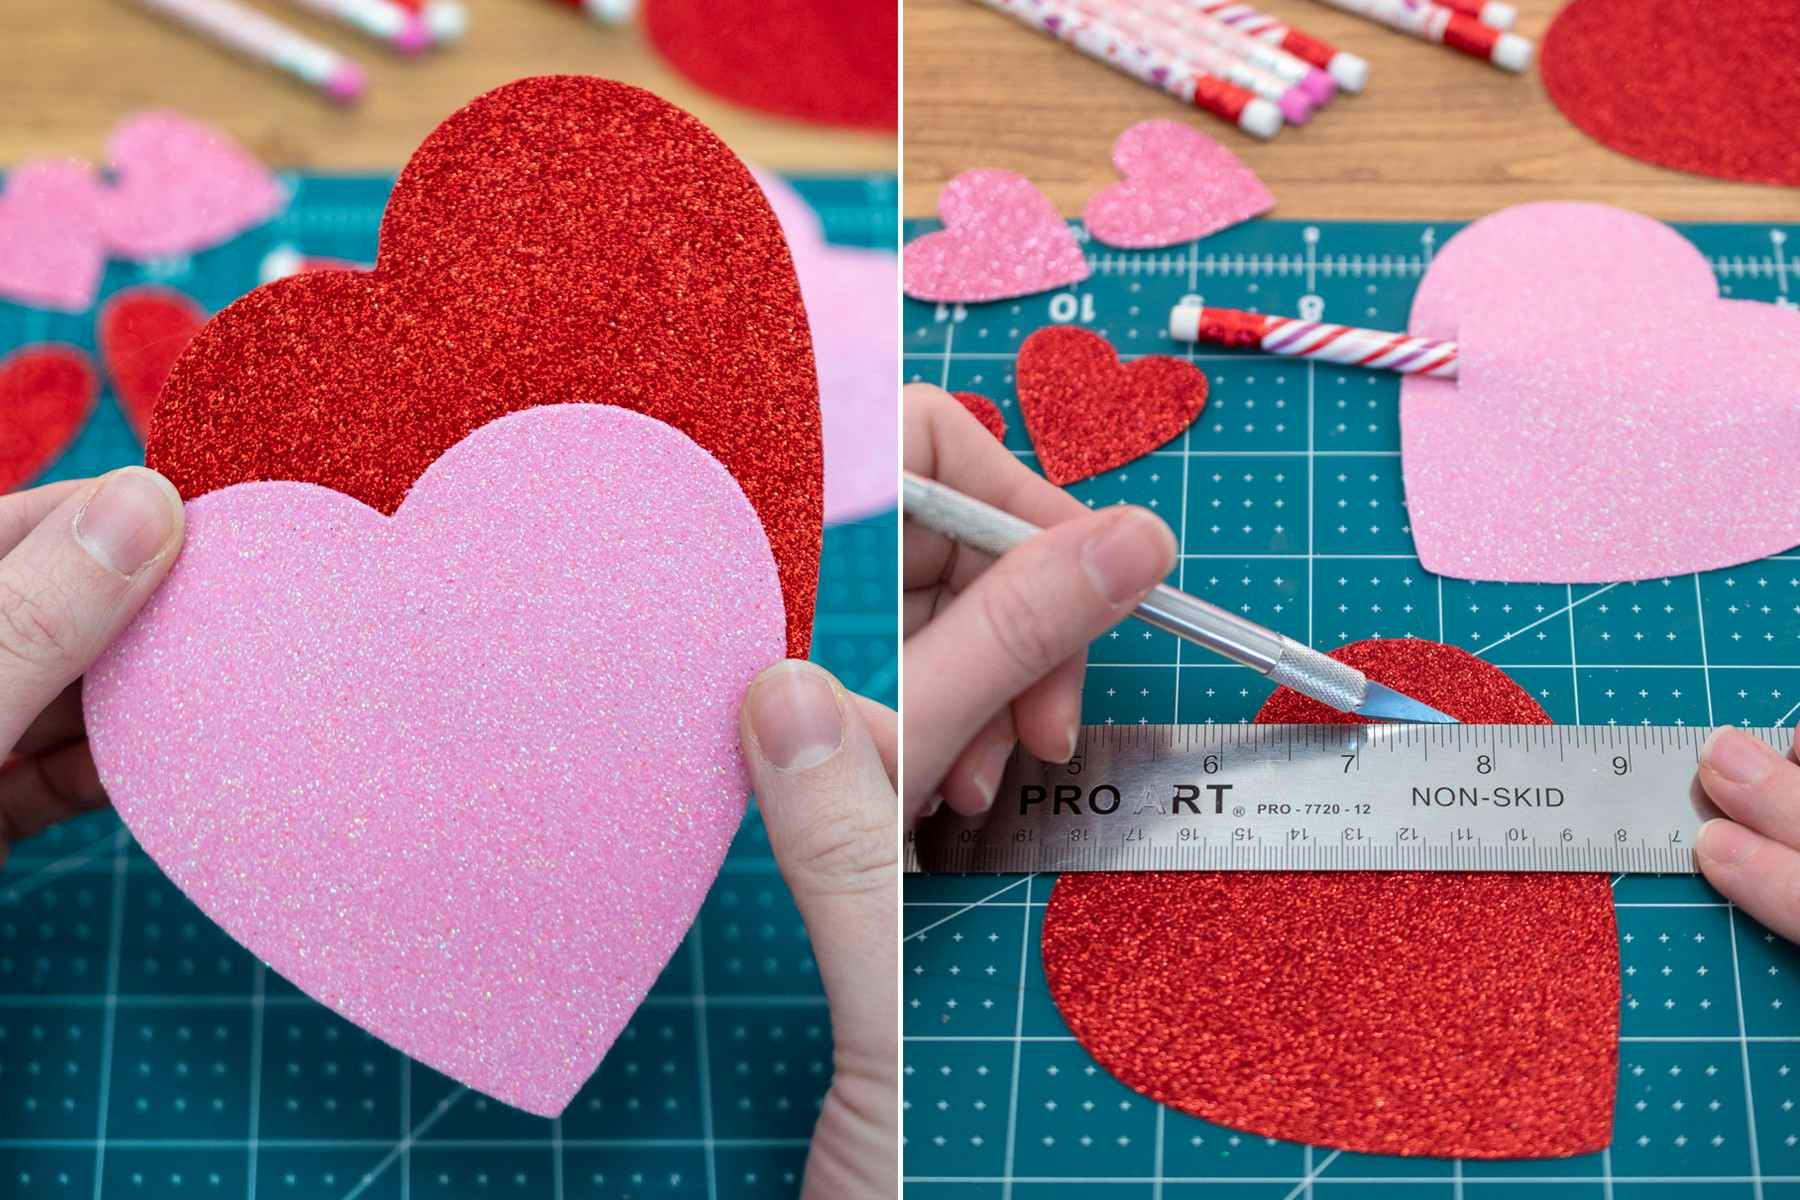 Simple EASY DIY Valentines Gift Ideas from Dollar Tree~Dollar Tree  Valentines Day Gifts Under $5 